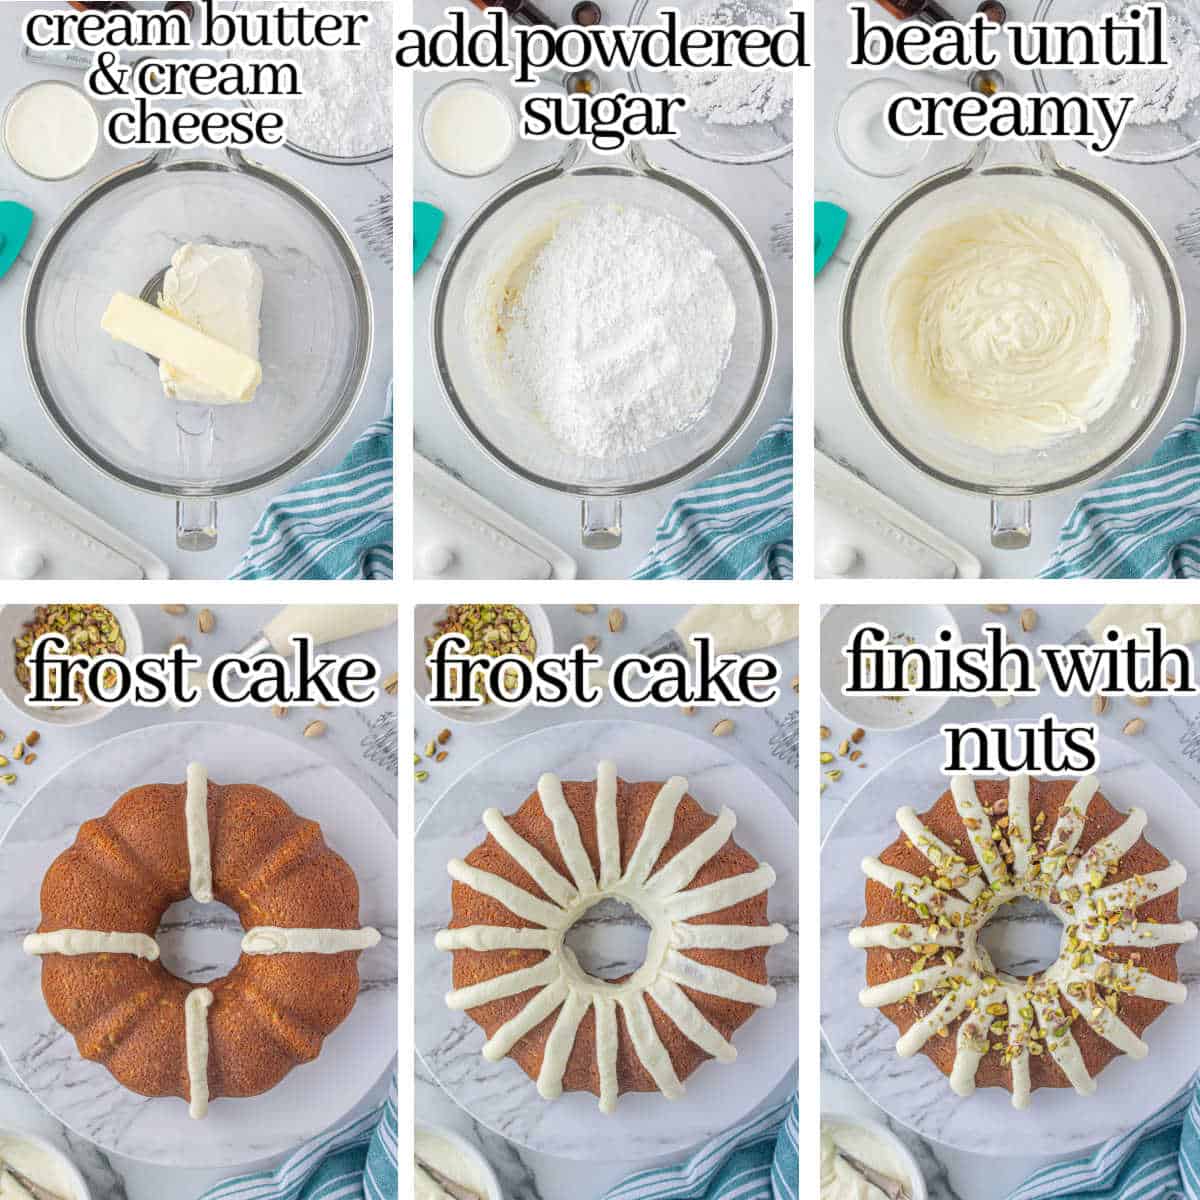 Step-by-step instructions to make sour cream frosting and examples how to frost a bundt cake. With print overlay for clarification.